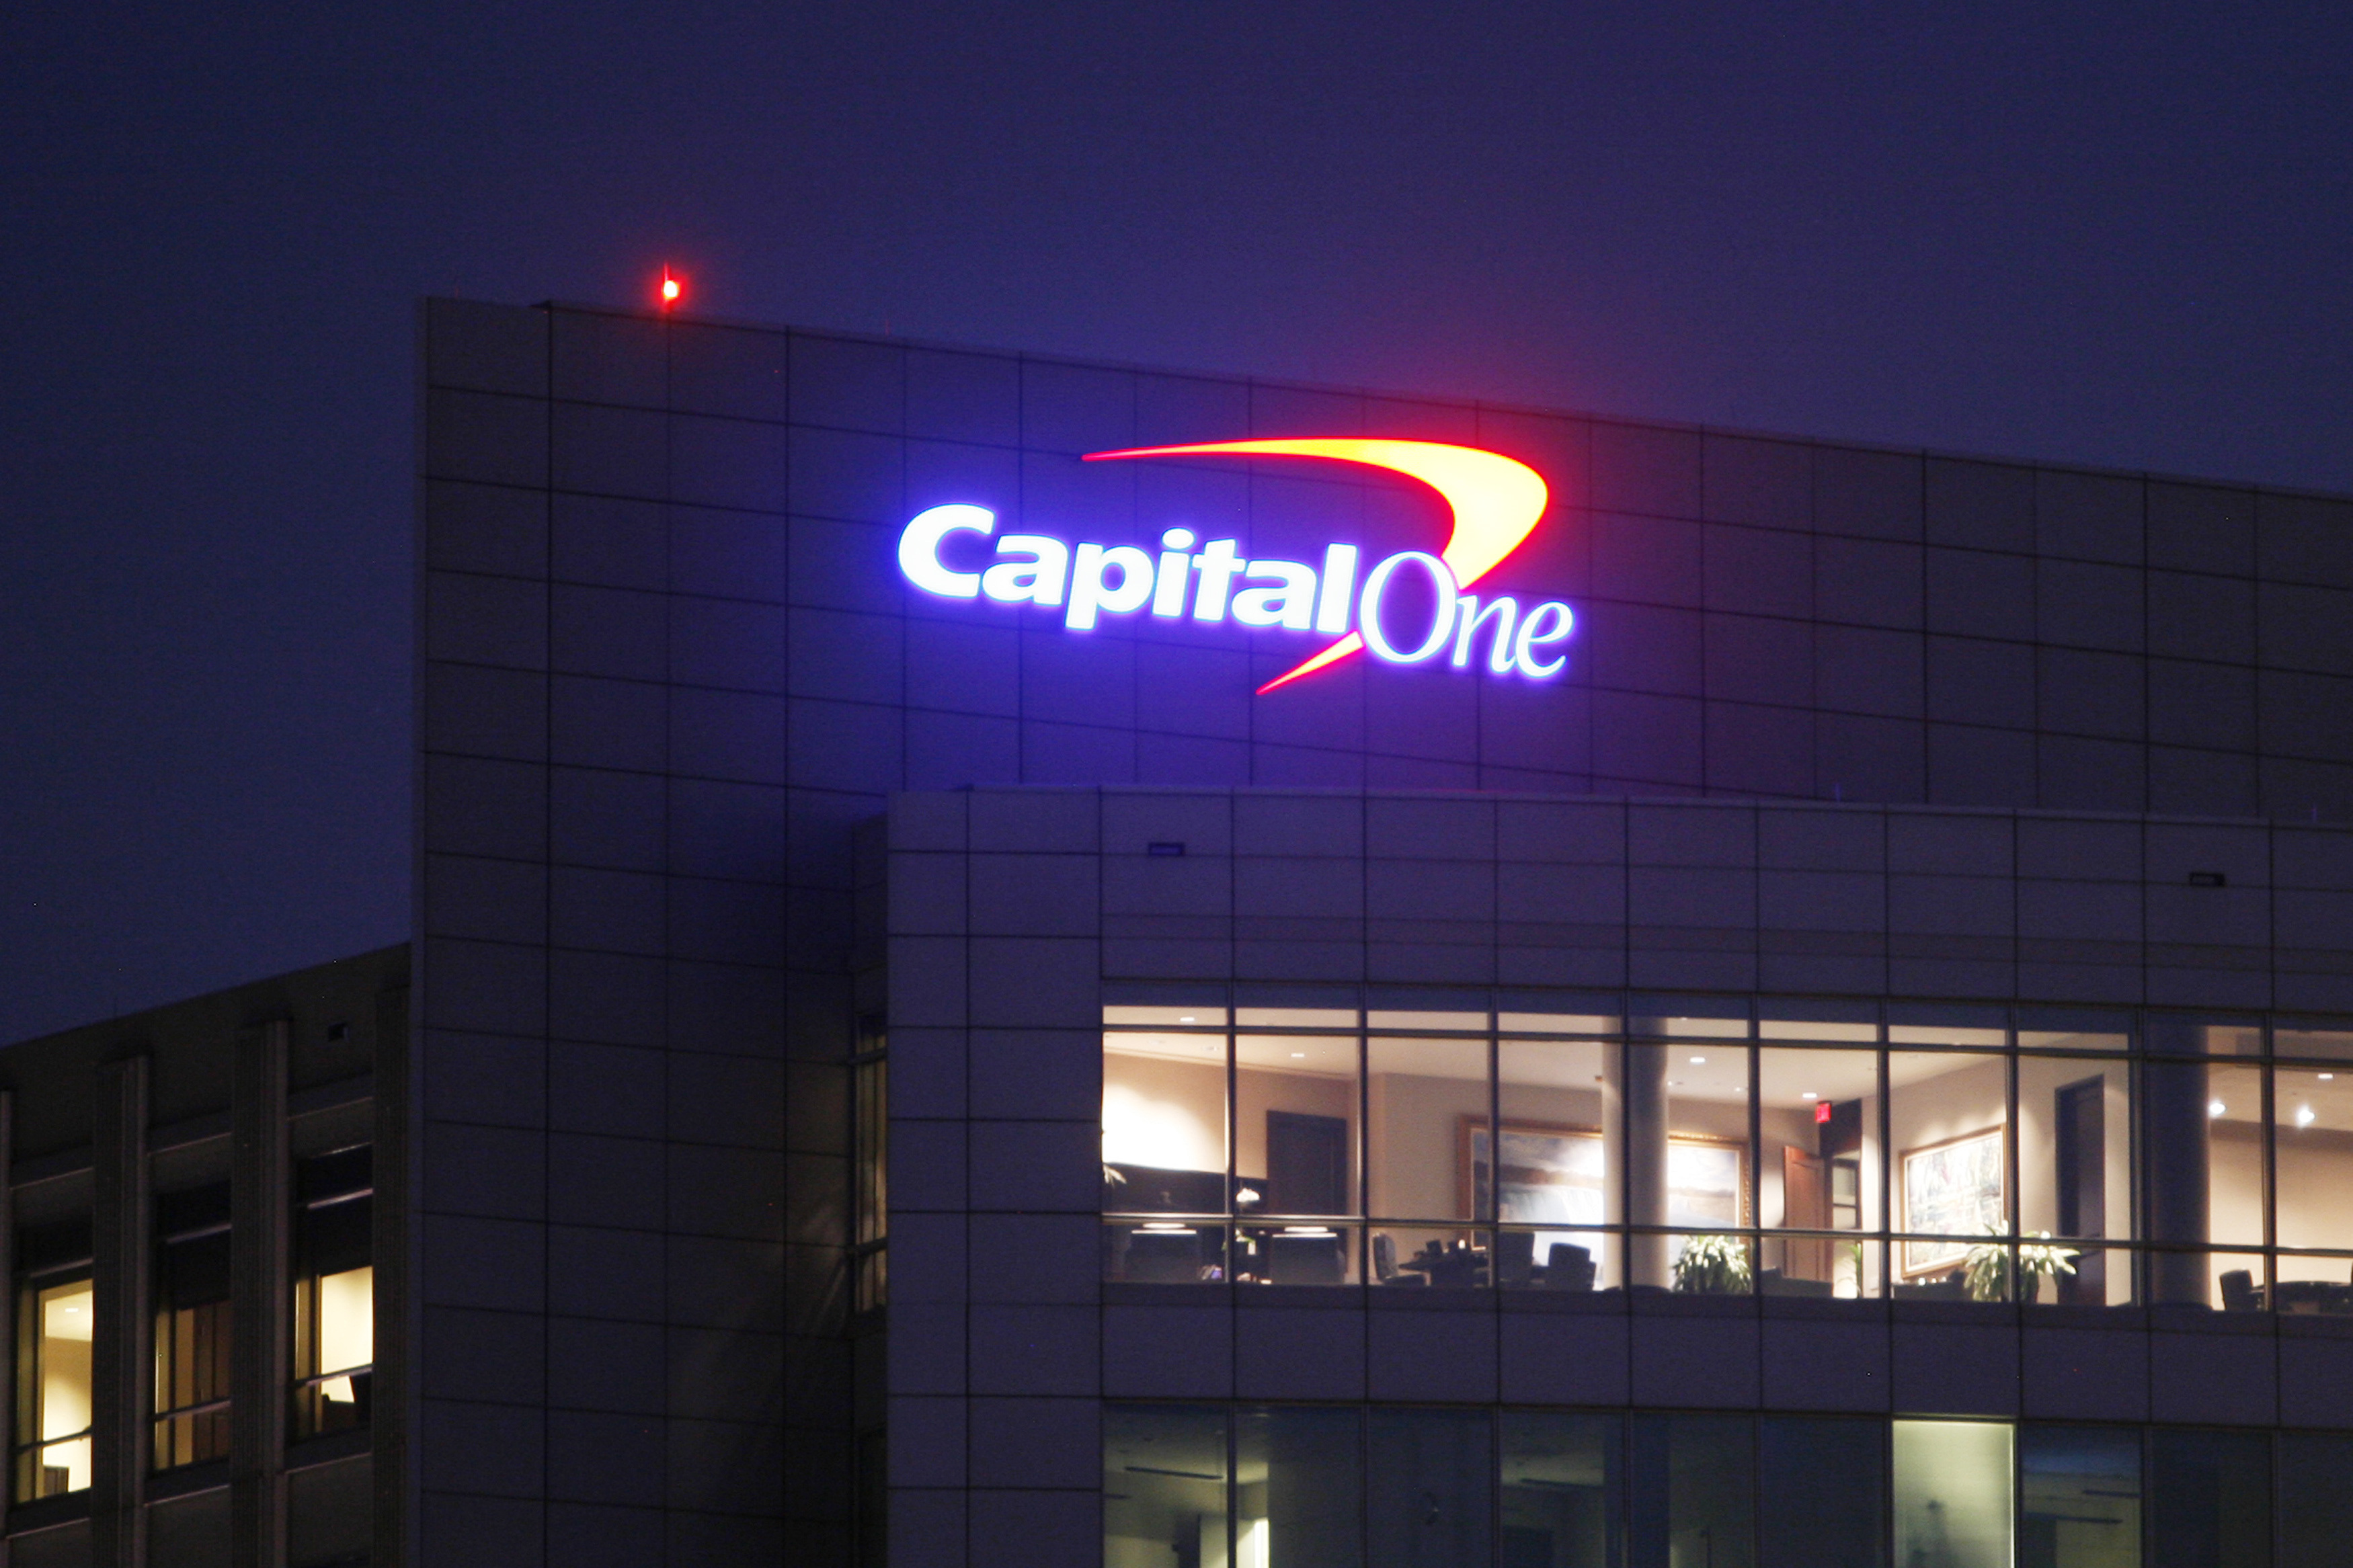 Hopper Secures $96 million from Capital One and Announces Long-Term  Strategic Partnership with Capital One Travel